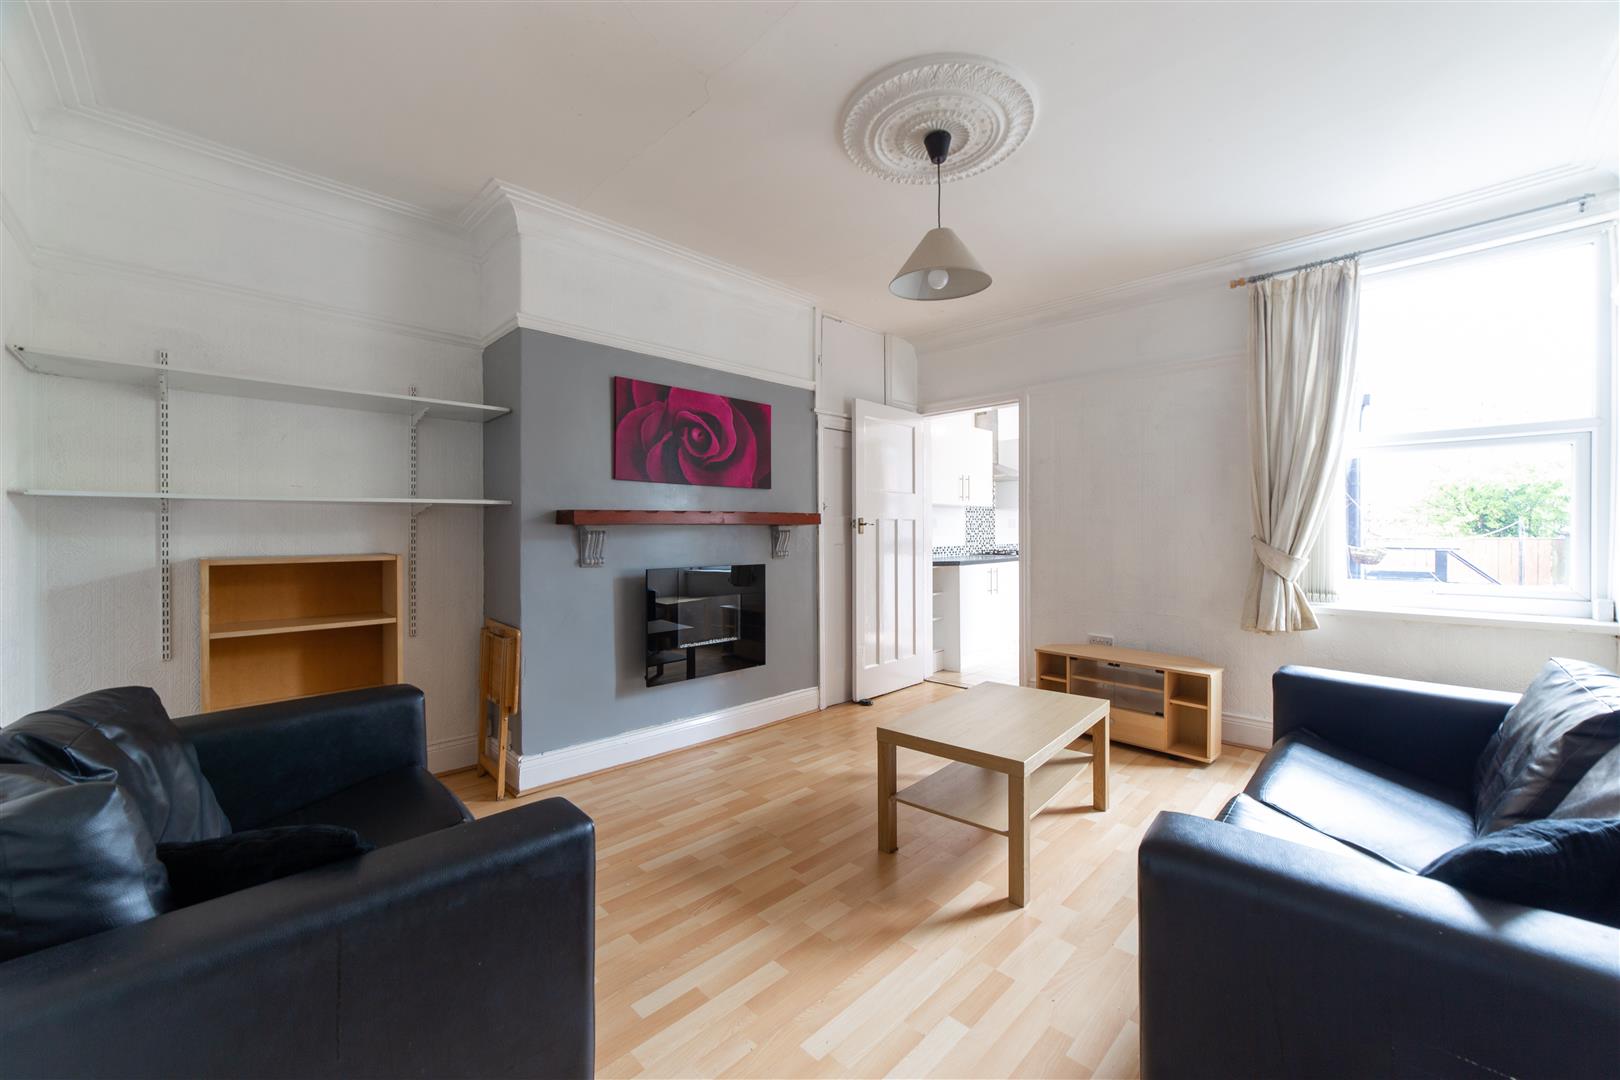 2 bed flat to rent in Rothbury Terrace, Newcastle Upon Tyne - Property Image 1